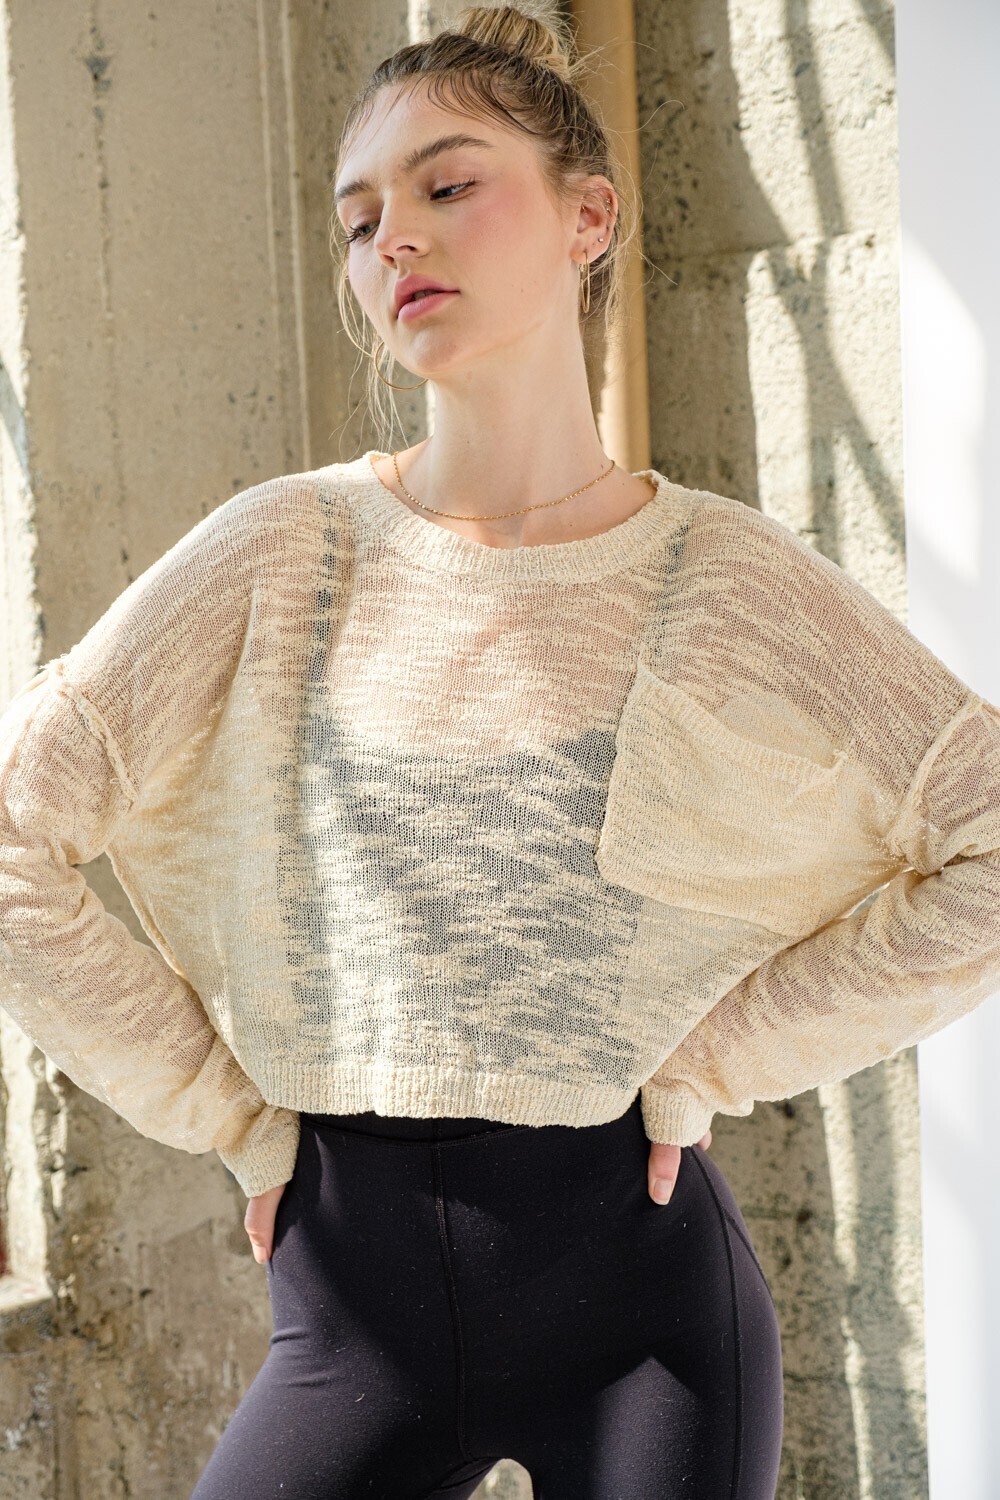 Natural Round Neck Light Weight Knit Sweater Top